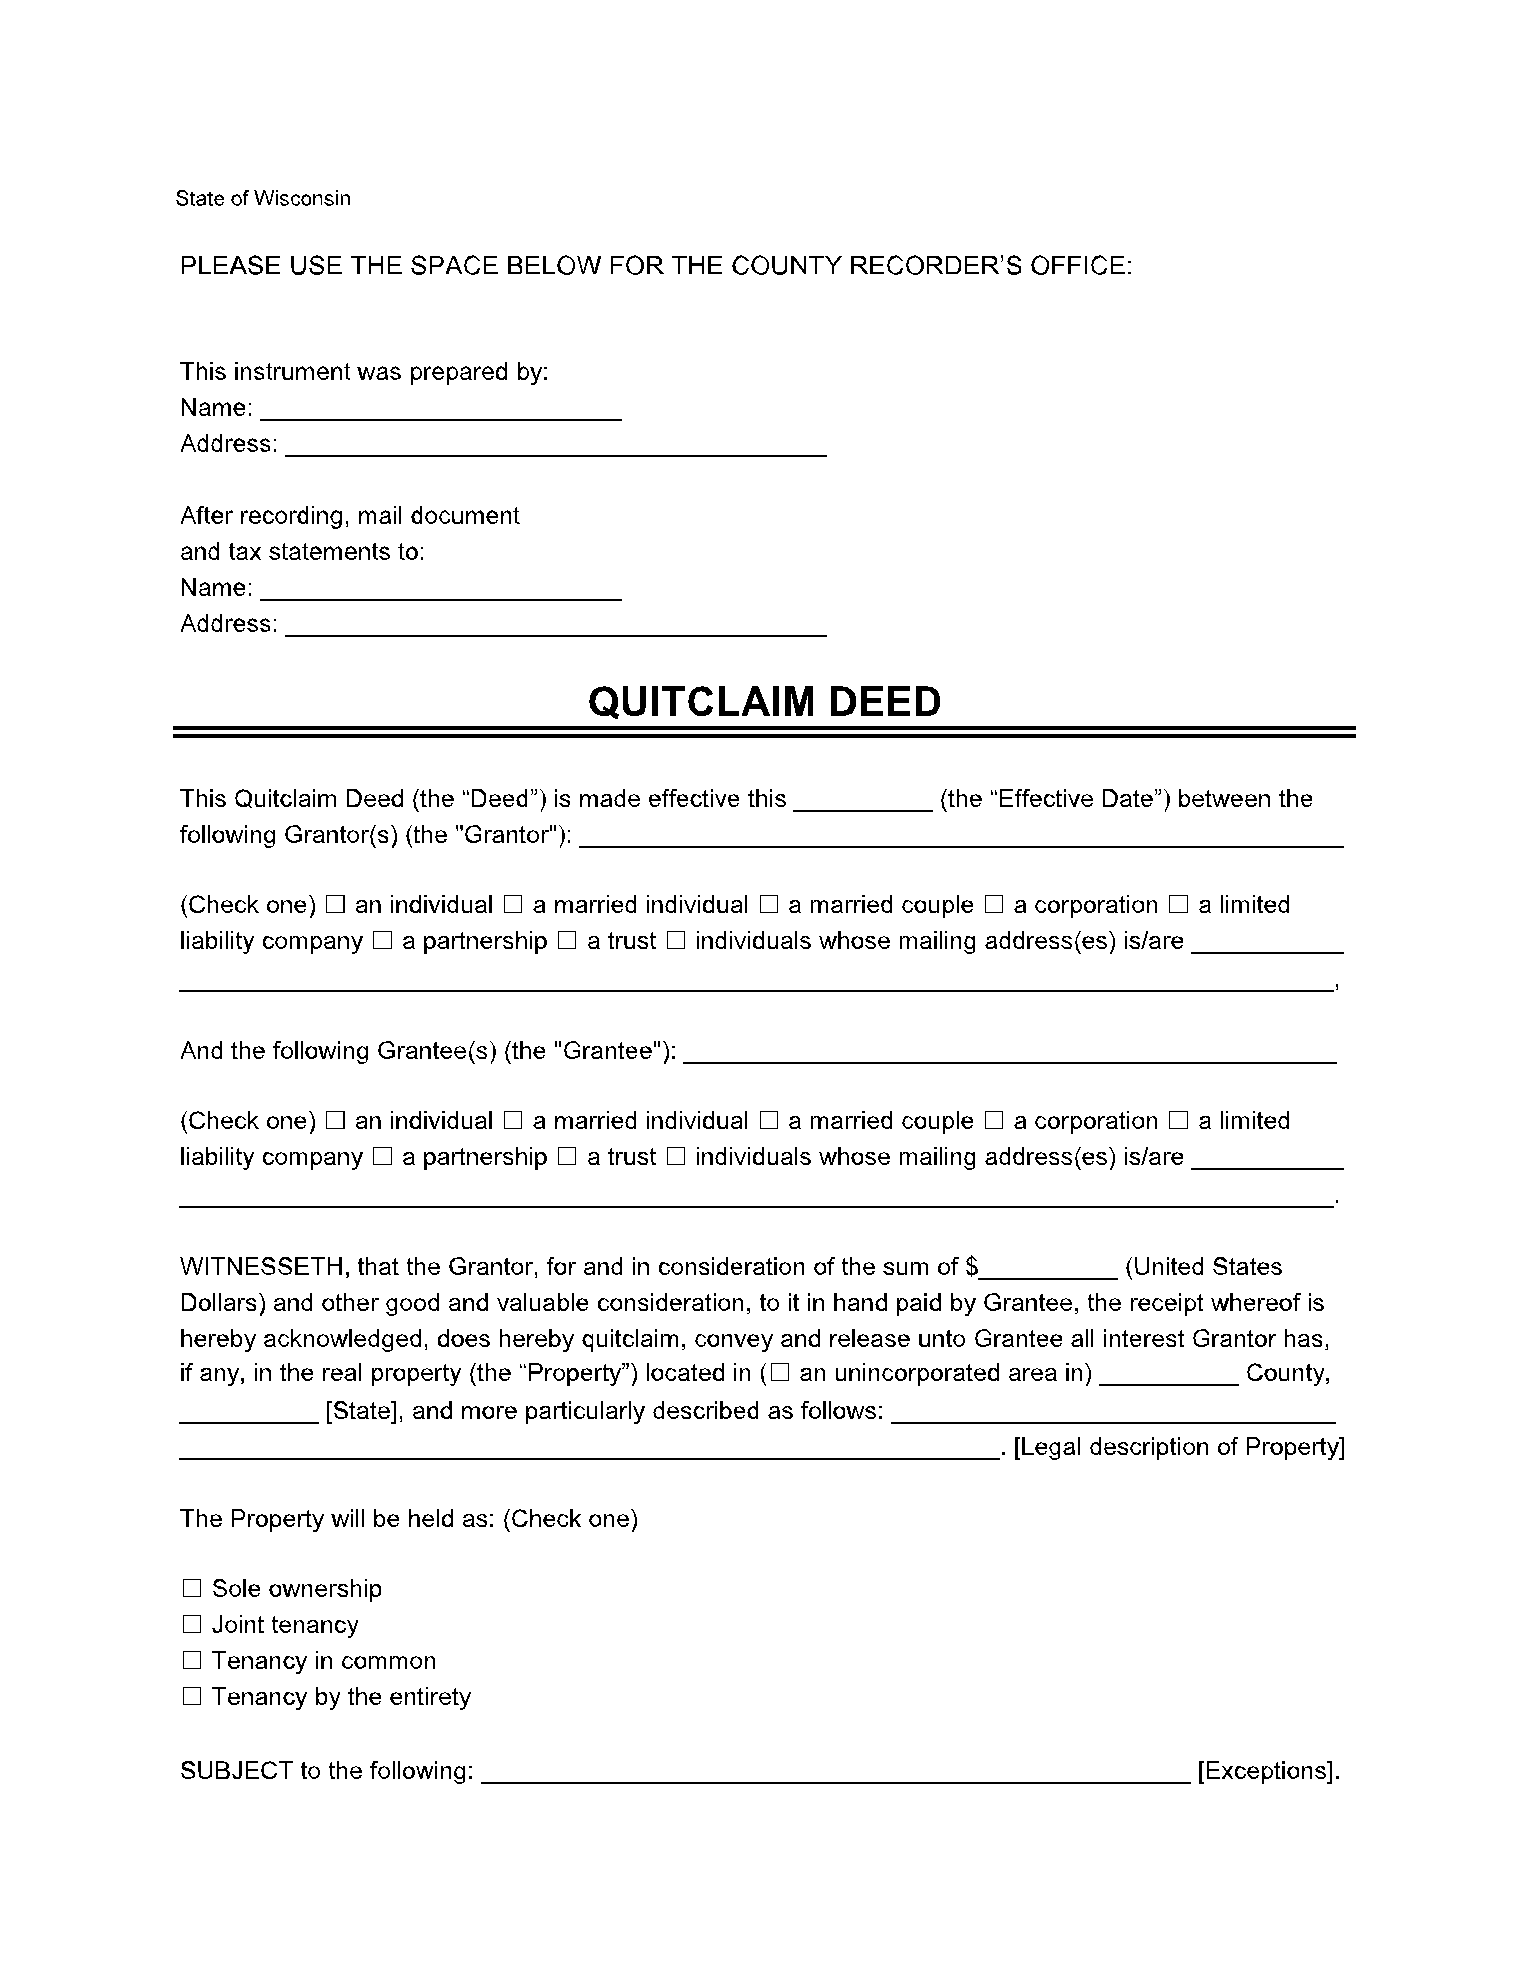 Wisconsin Quit Claim Deed Form 1